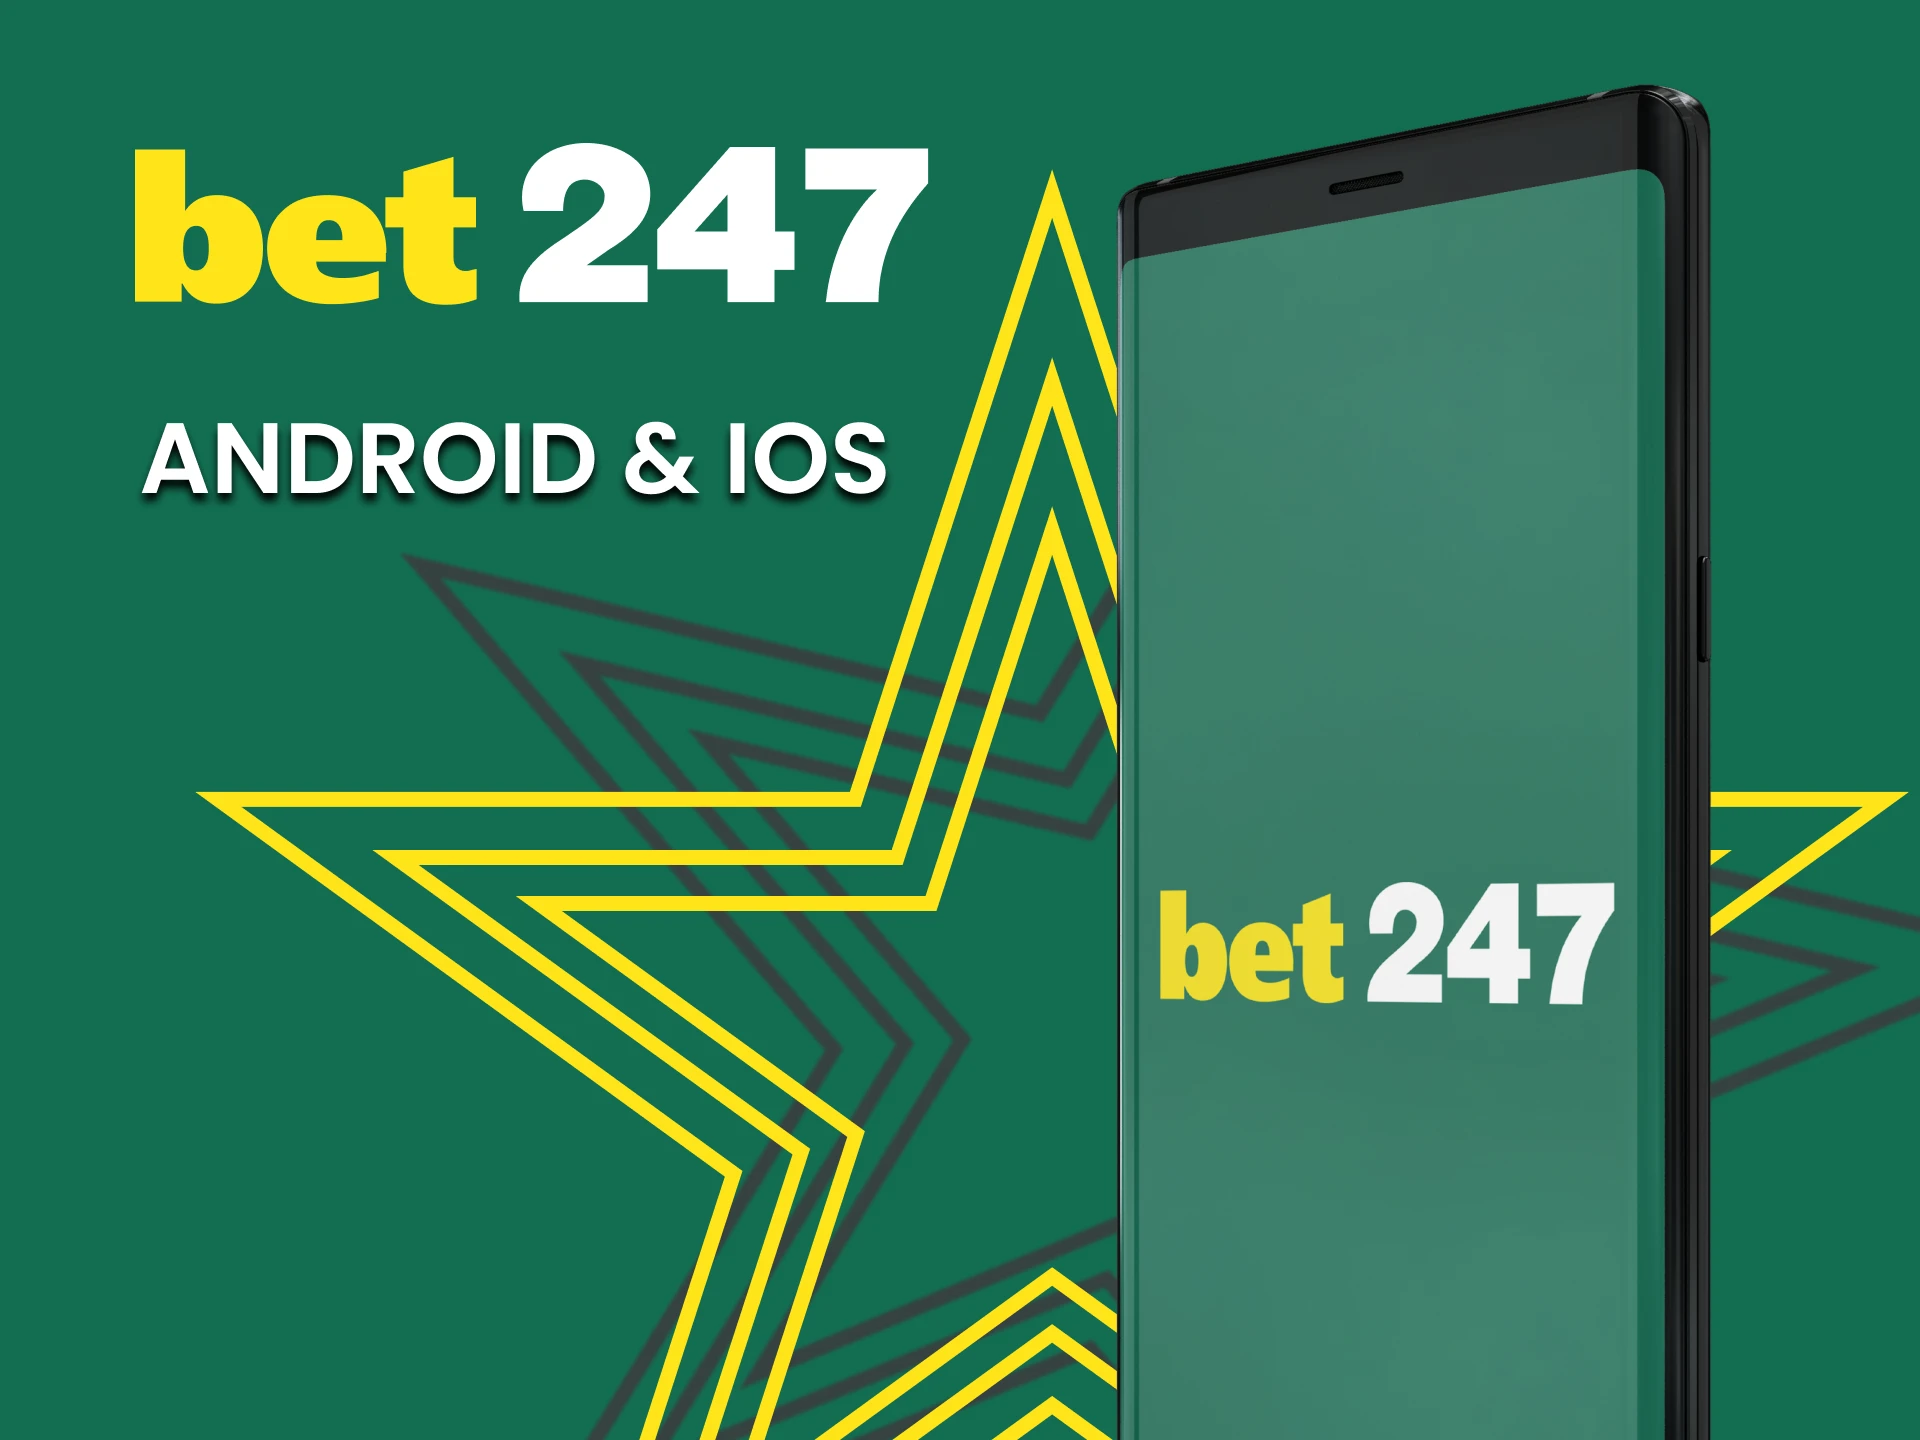 With Bet247, play anywhere with the app on your phone.